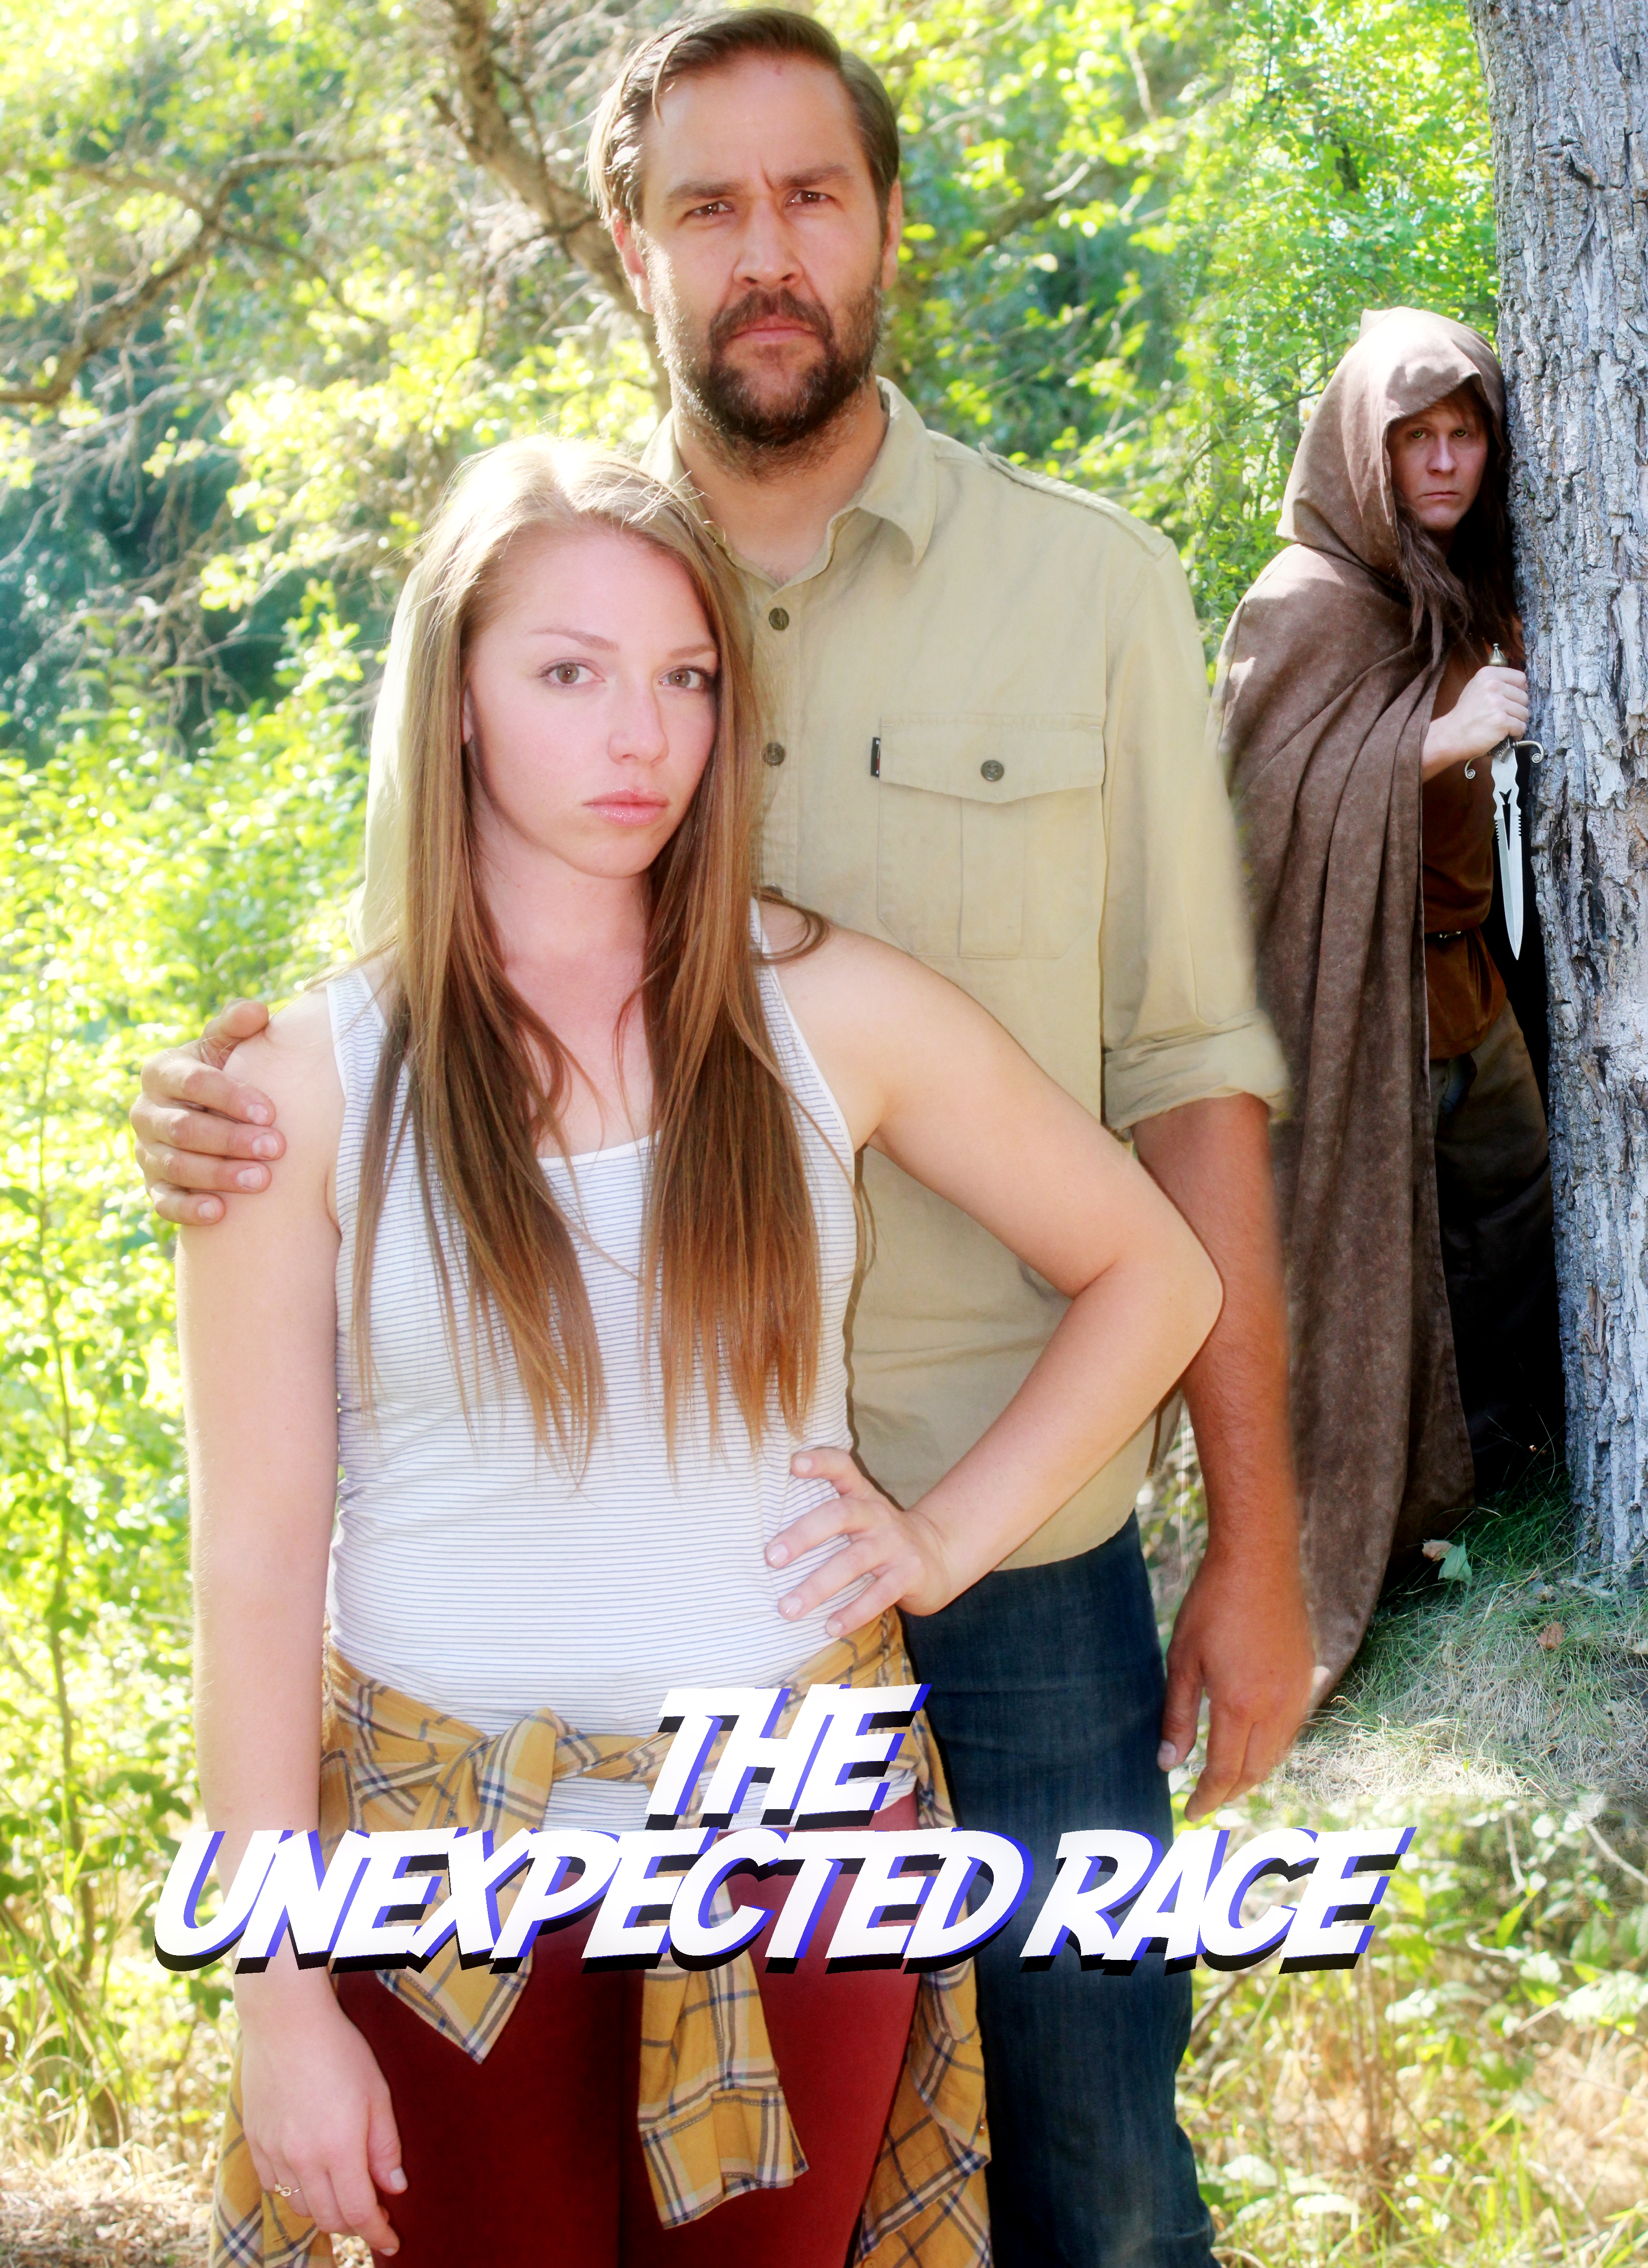 Unexpected Race (2018) starring James Alexander on DVD on DVD